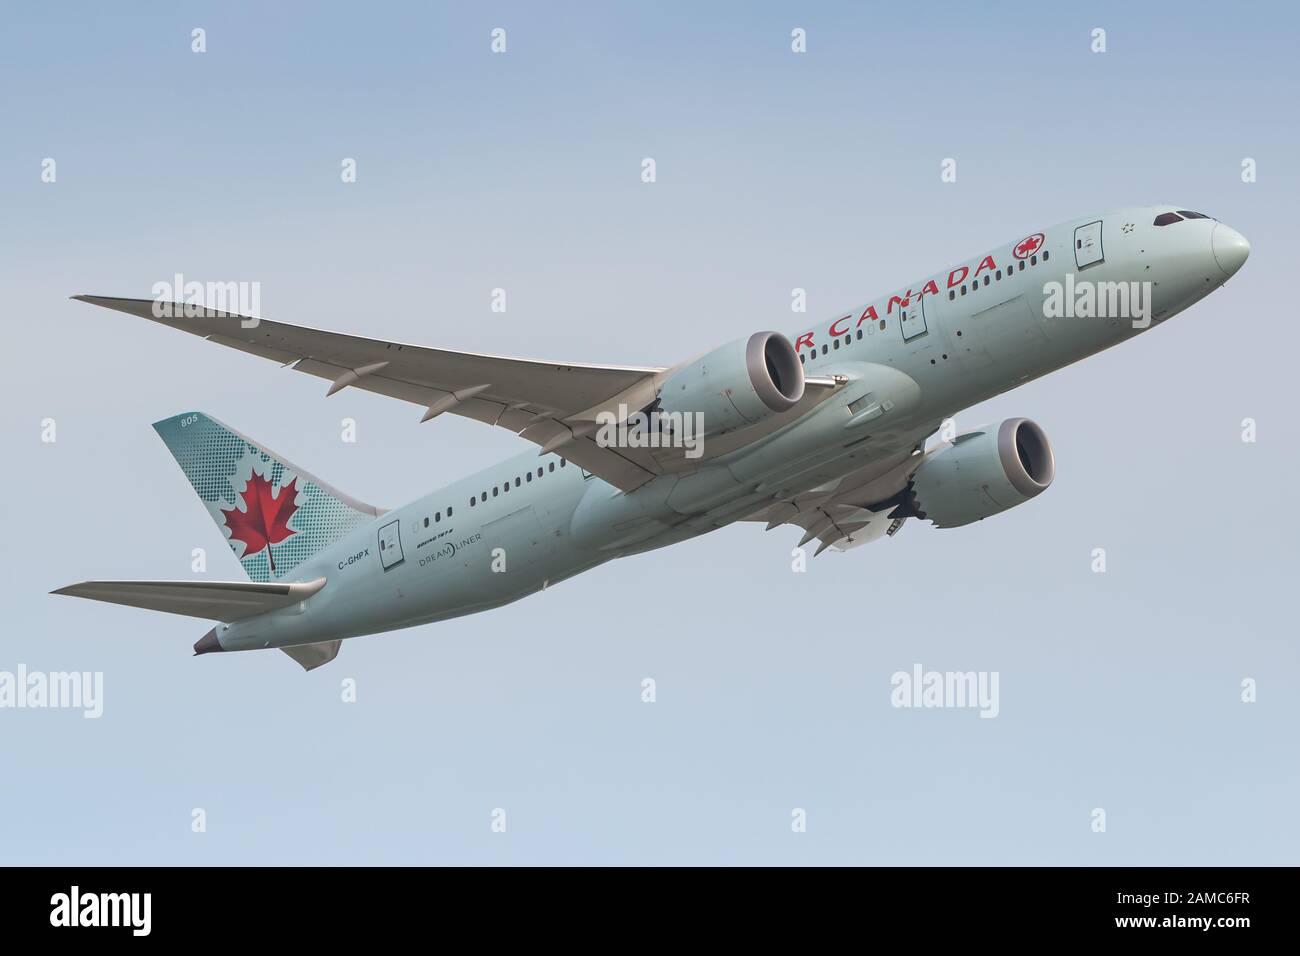 Frankfurt, Germany - April 22, 2018: Air Canada Boeing 787 airplane at Frankfurt airport (FRA) in the Germany. Boeing is an aircraft manufacturer base Stock Photo